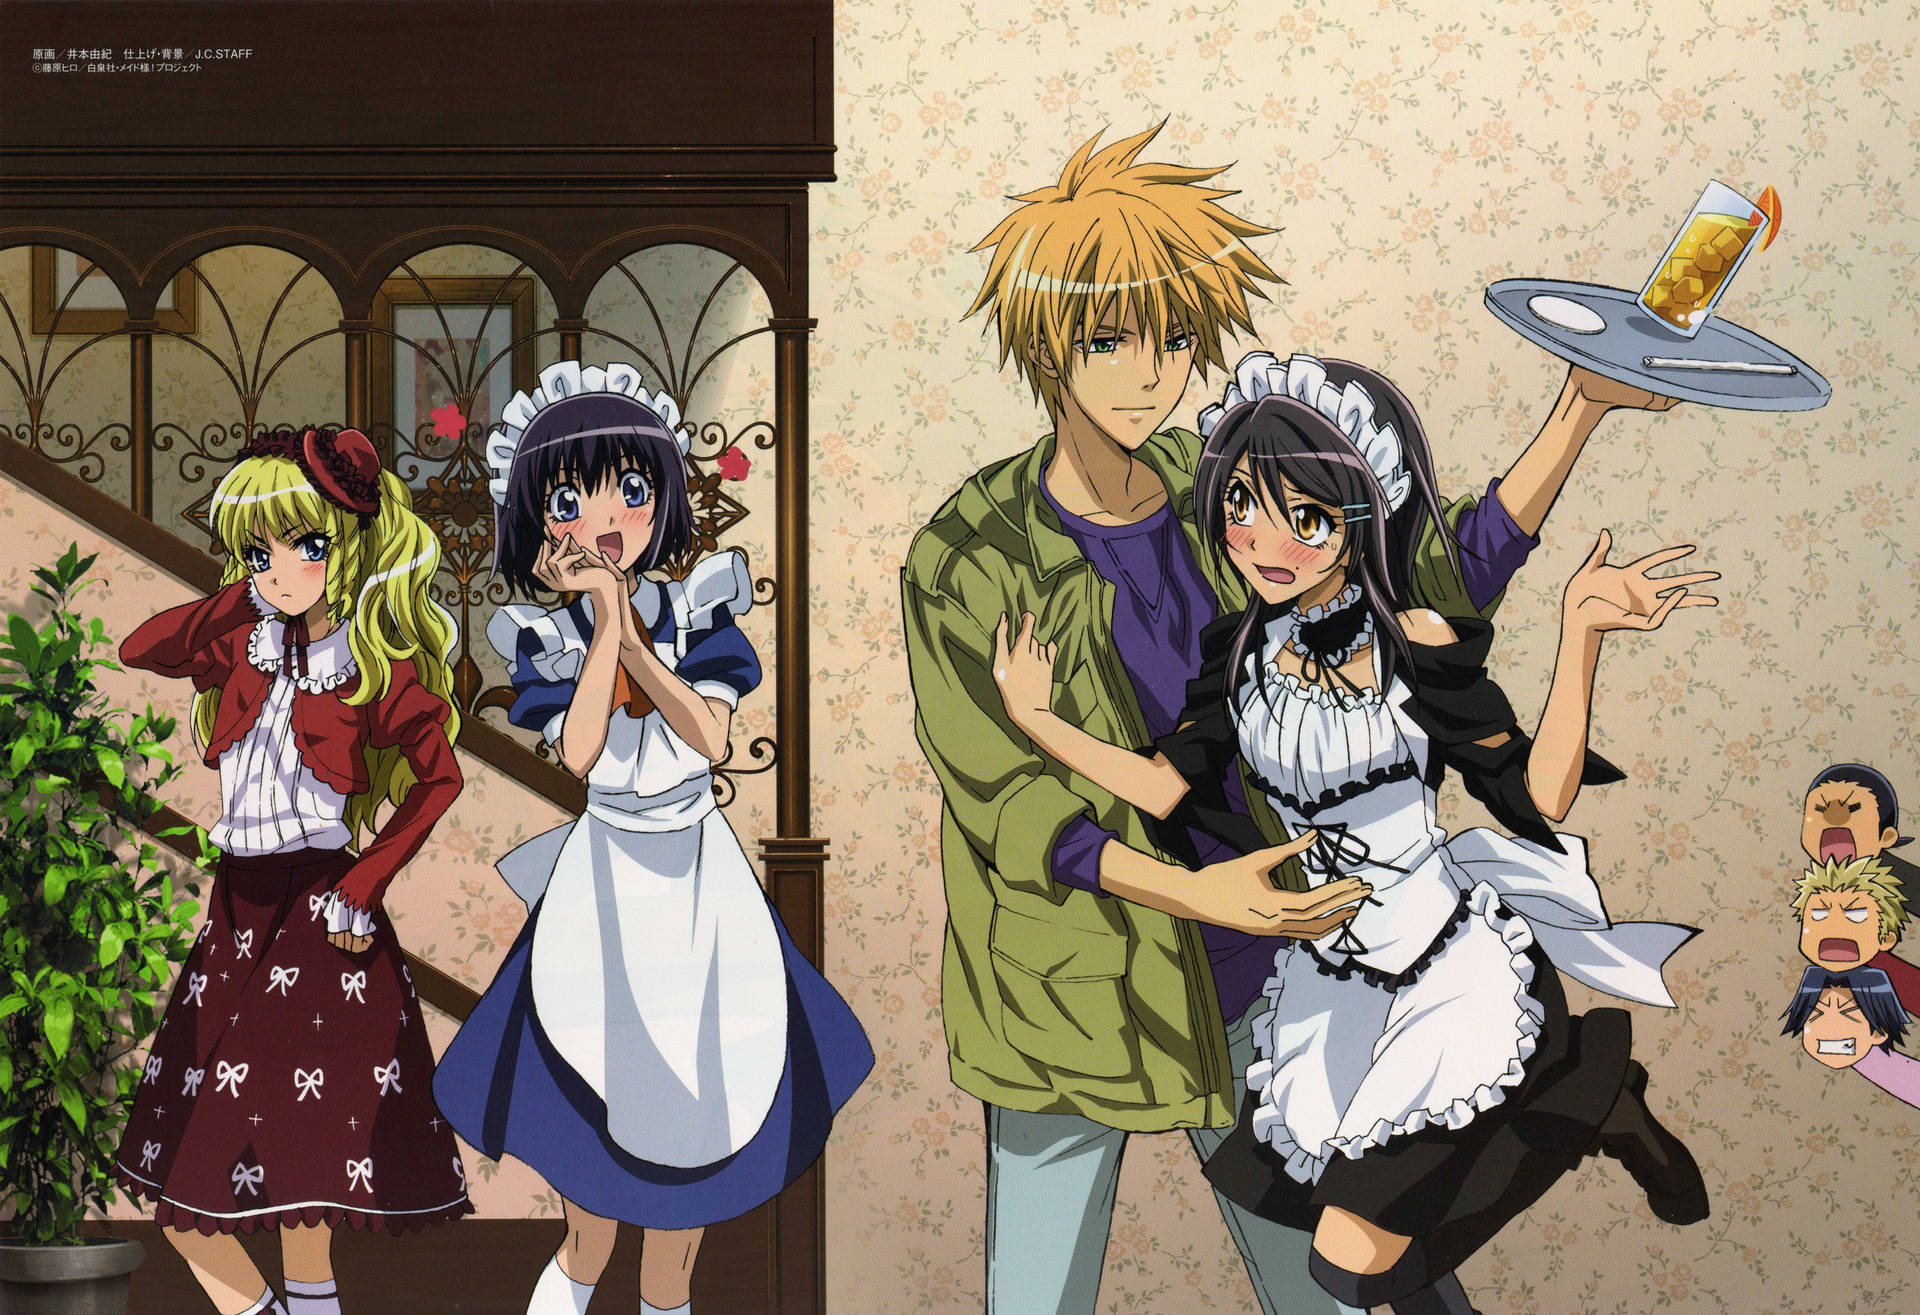 10. "Usui and Misaki from Maid Sama!" - wide 11